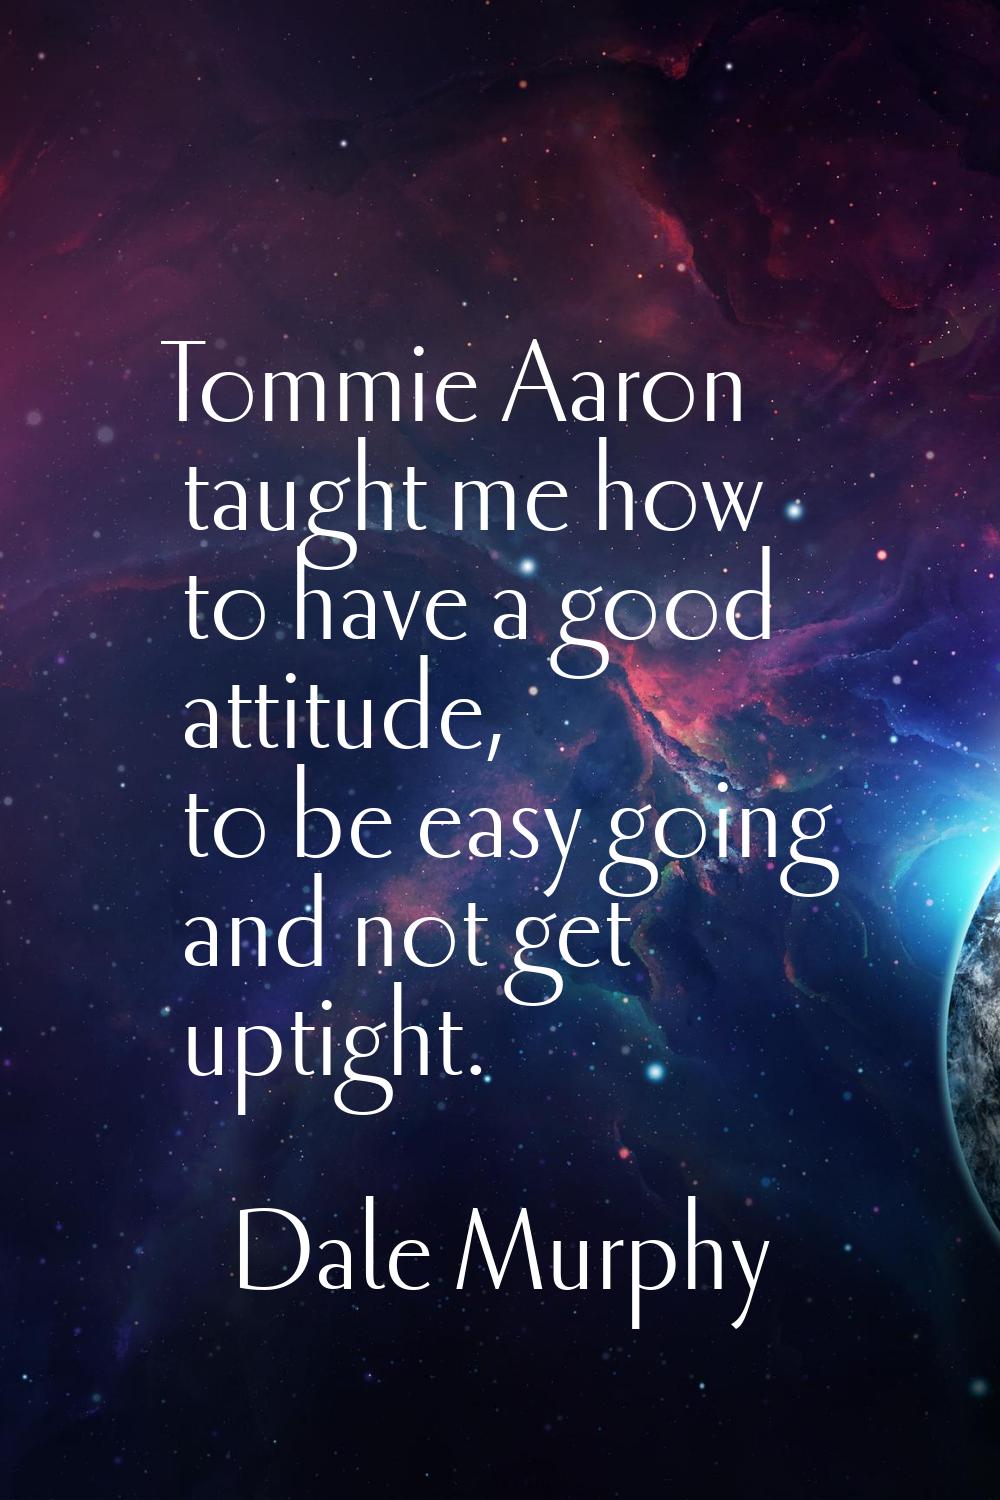 Tommie Aaron taught me how to have a good attitude, to be easy going and not get uptight.